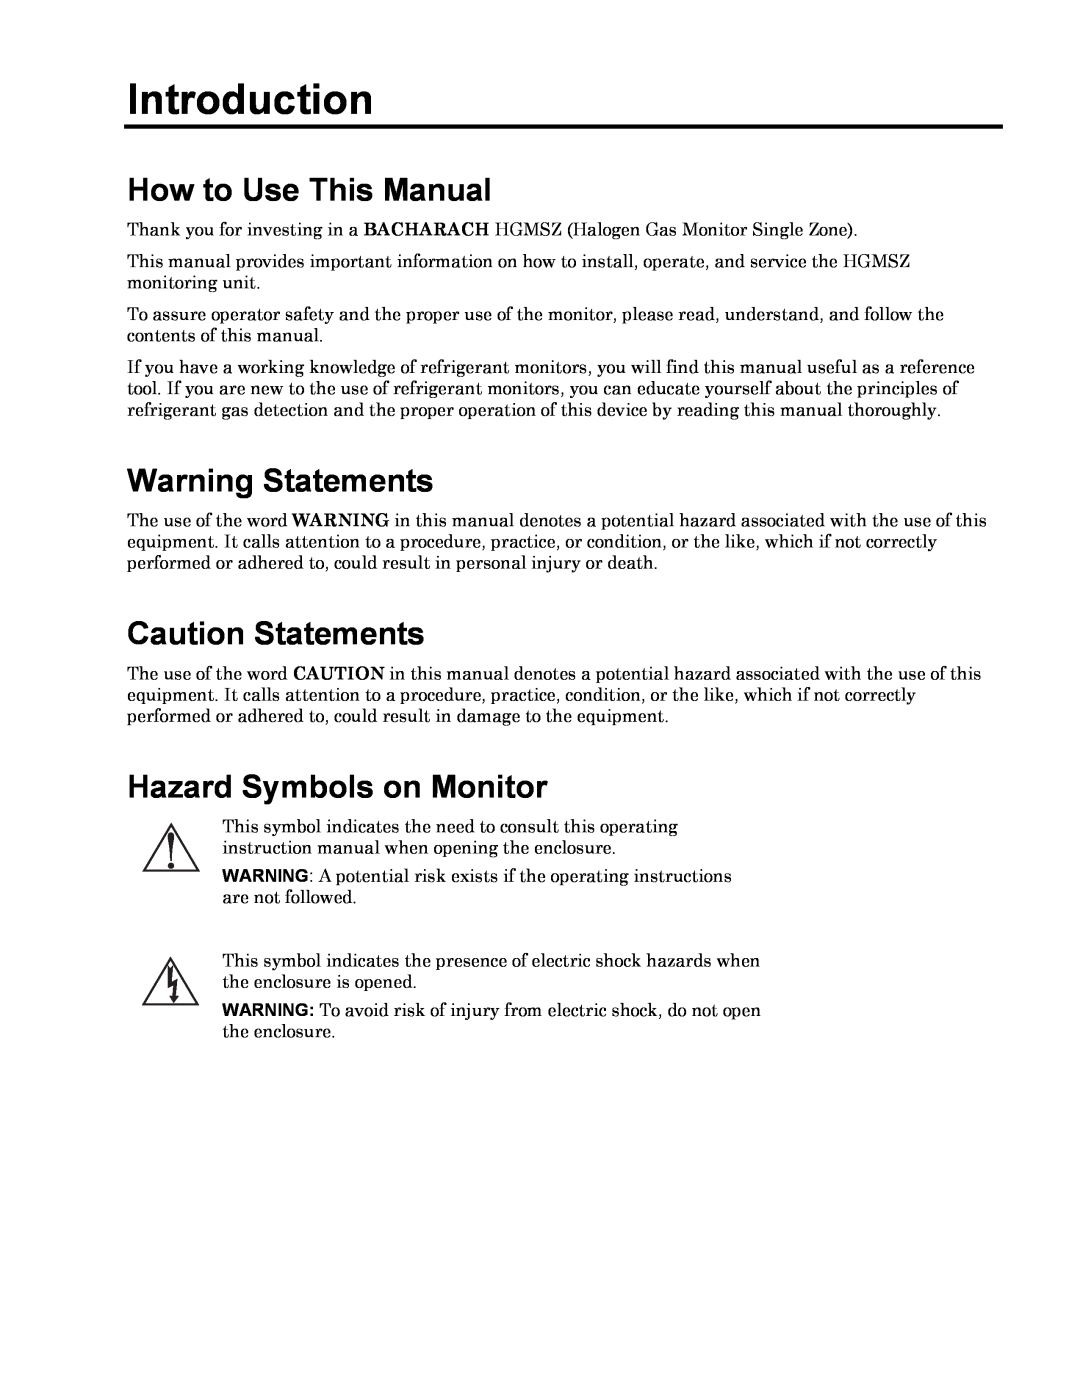 Bacharach 3015-4256 manual Introduction, How to Use This Manual, Warning Statements, Caution Statements 